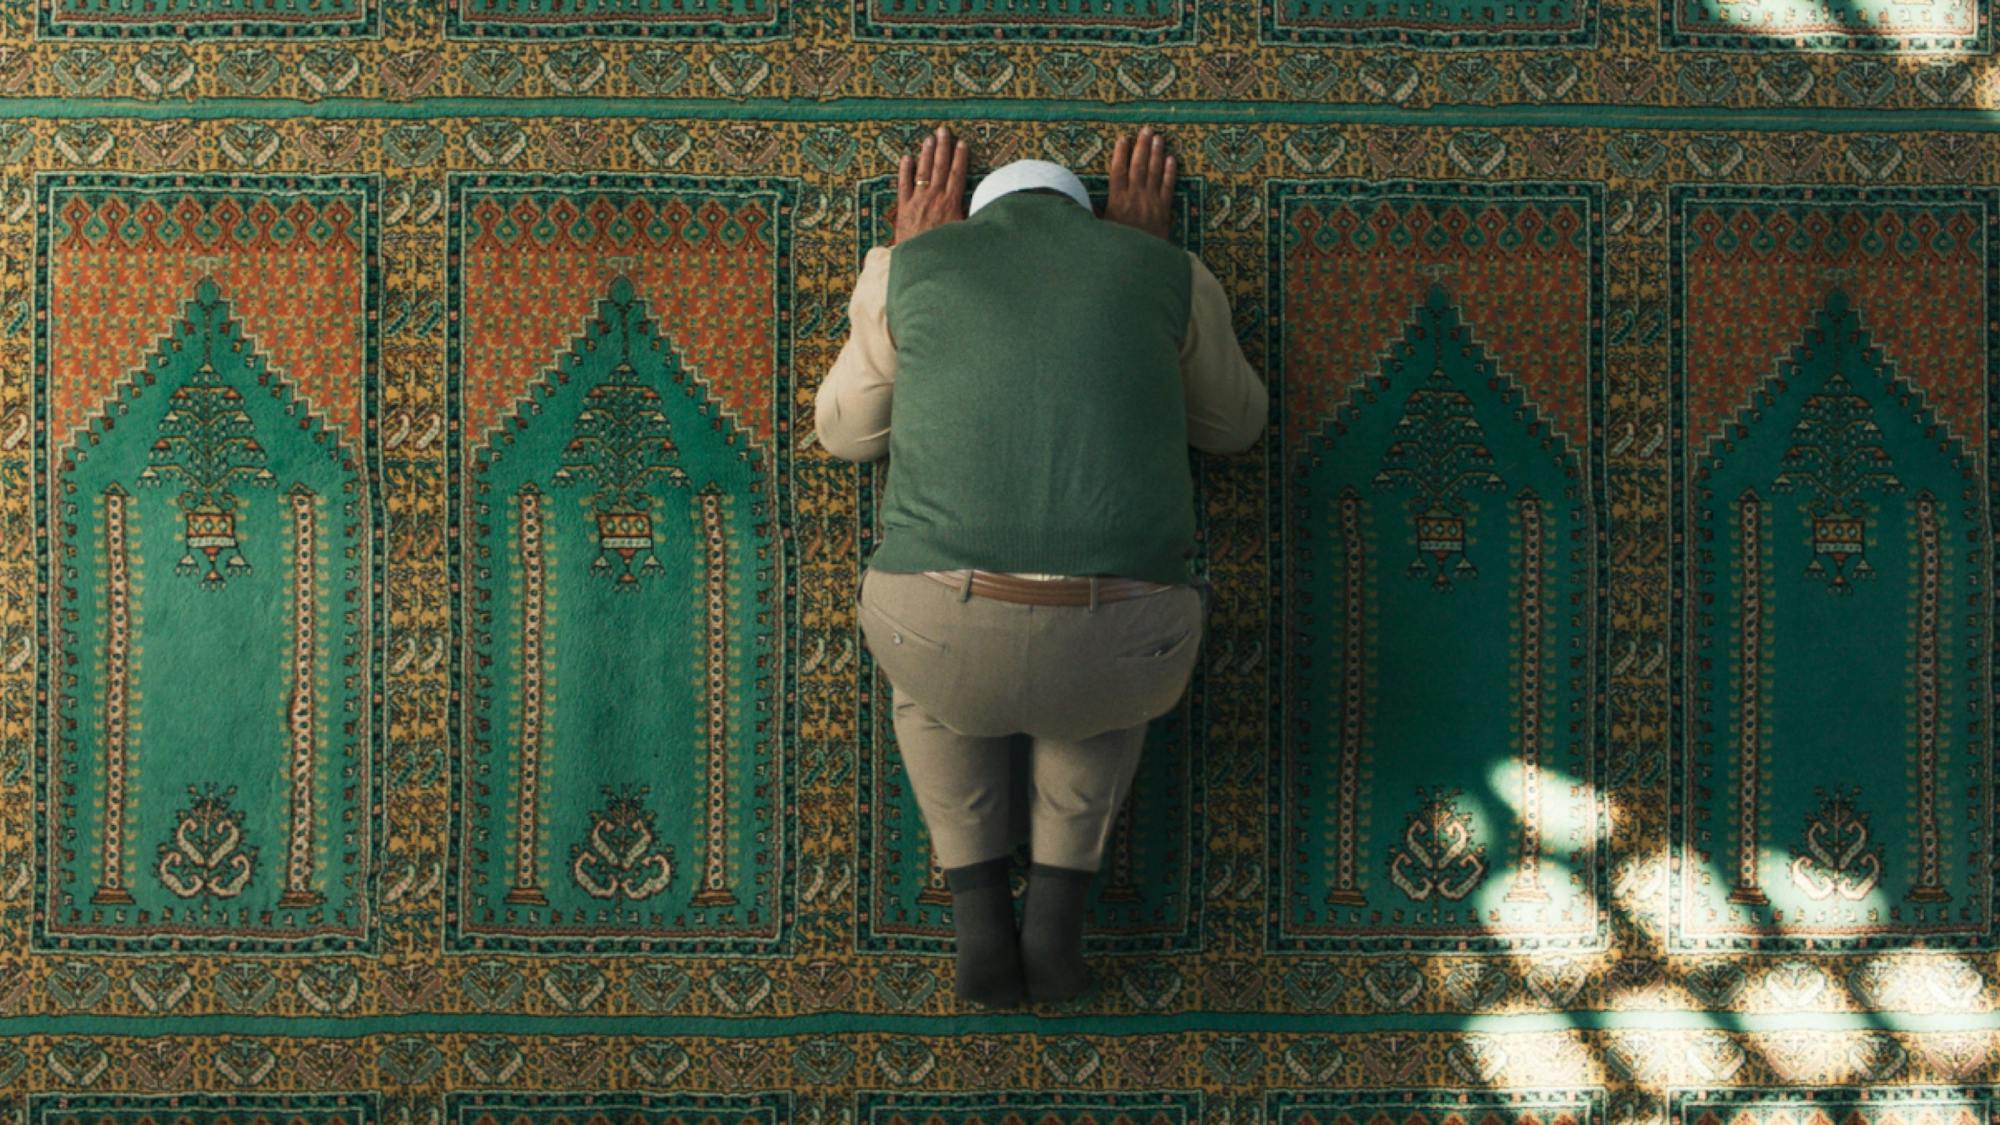 The Hodja bows on a beautifully patterned prayer rug. He wears a green sweater vest that matches the rug. Light shines in from above. 